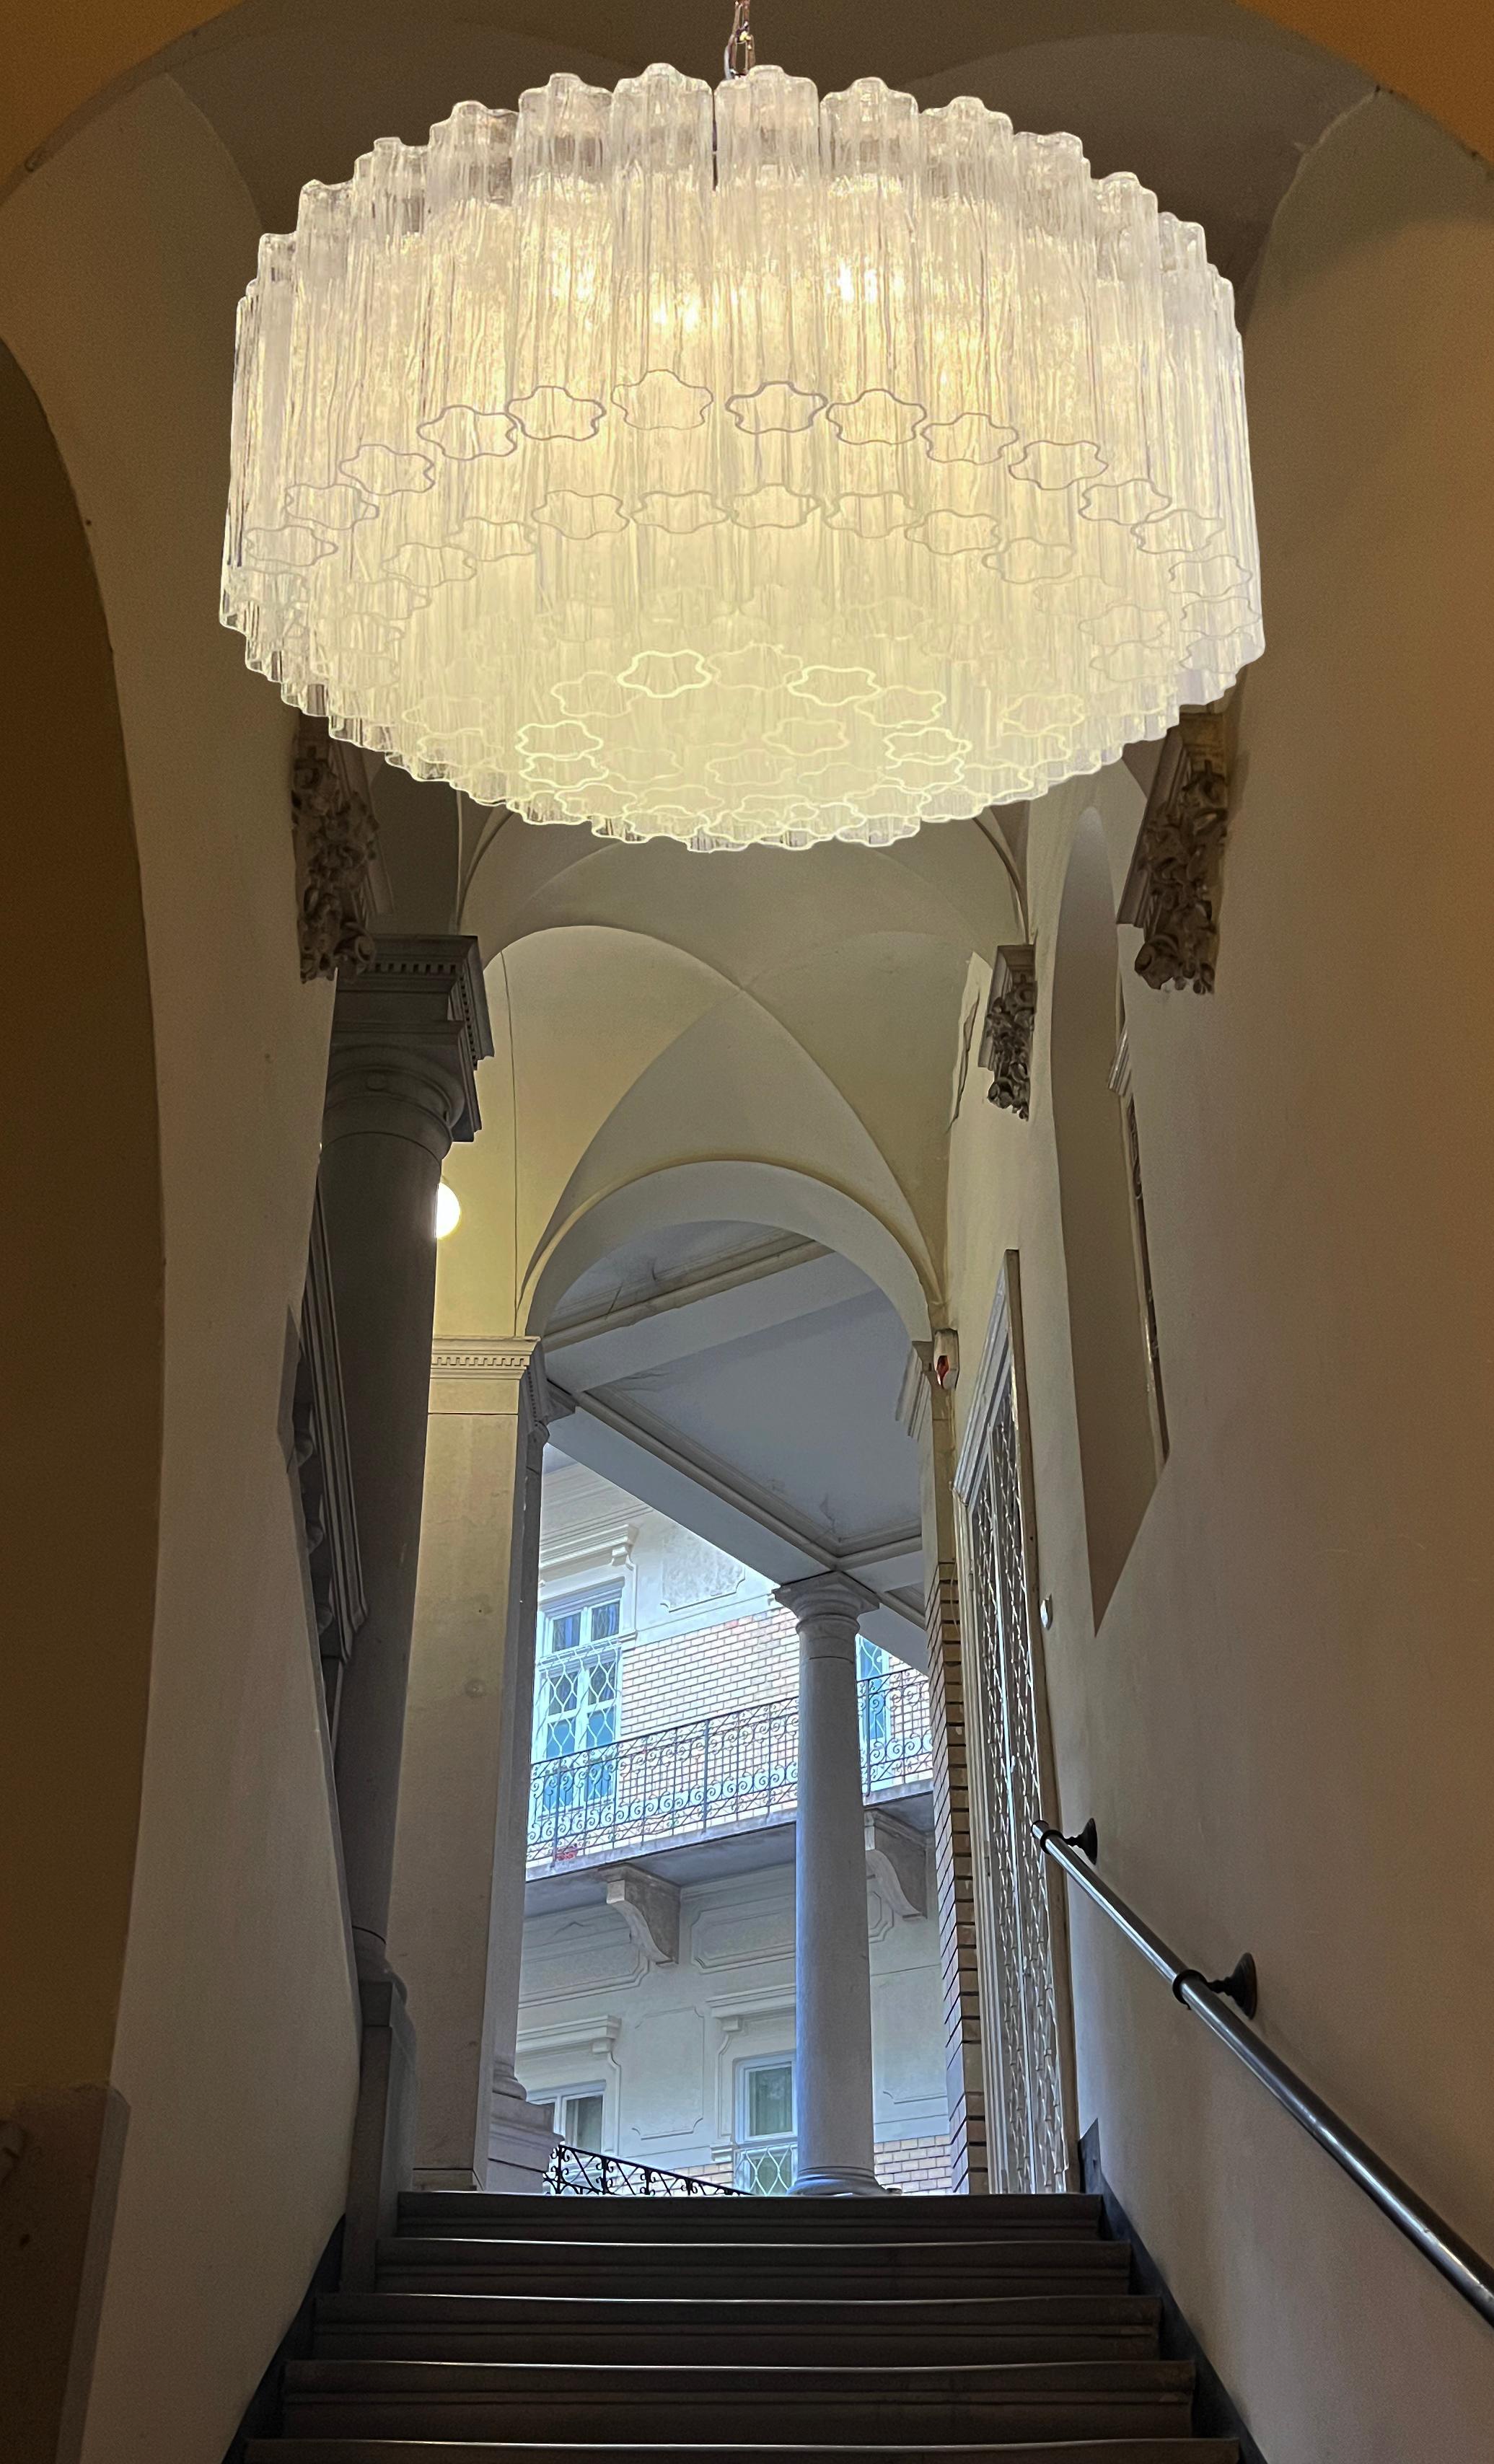 Italian vintage chandeliers in Murano glass and nickel plated metal structure. The armor polished nickel supports 101 large clear glass tubes in a star shape. Can be used as a chandelier with chain, or as a ceiling light, the structure will be hung